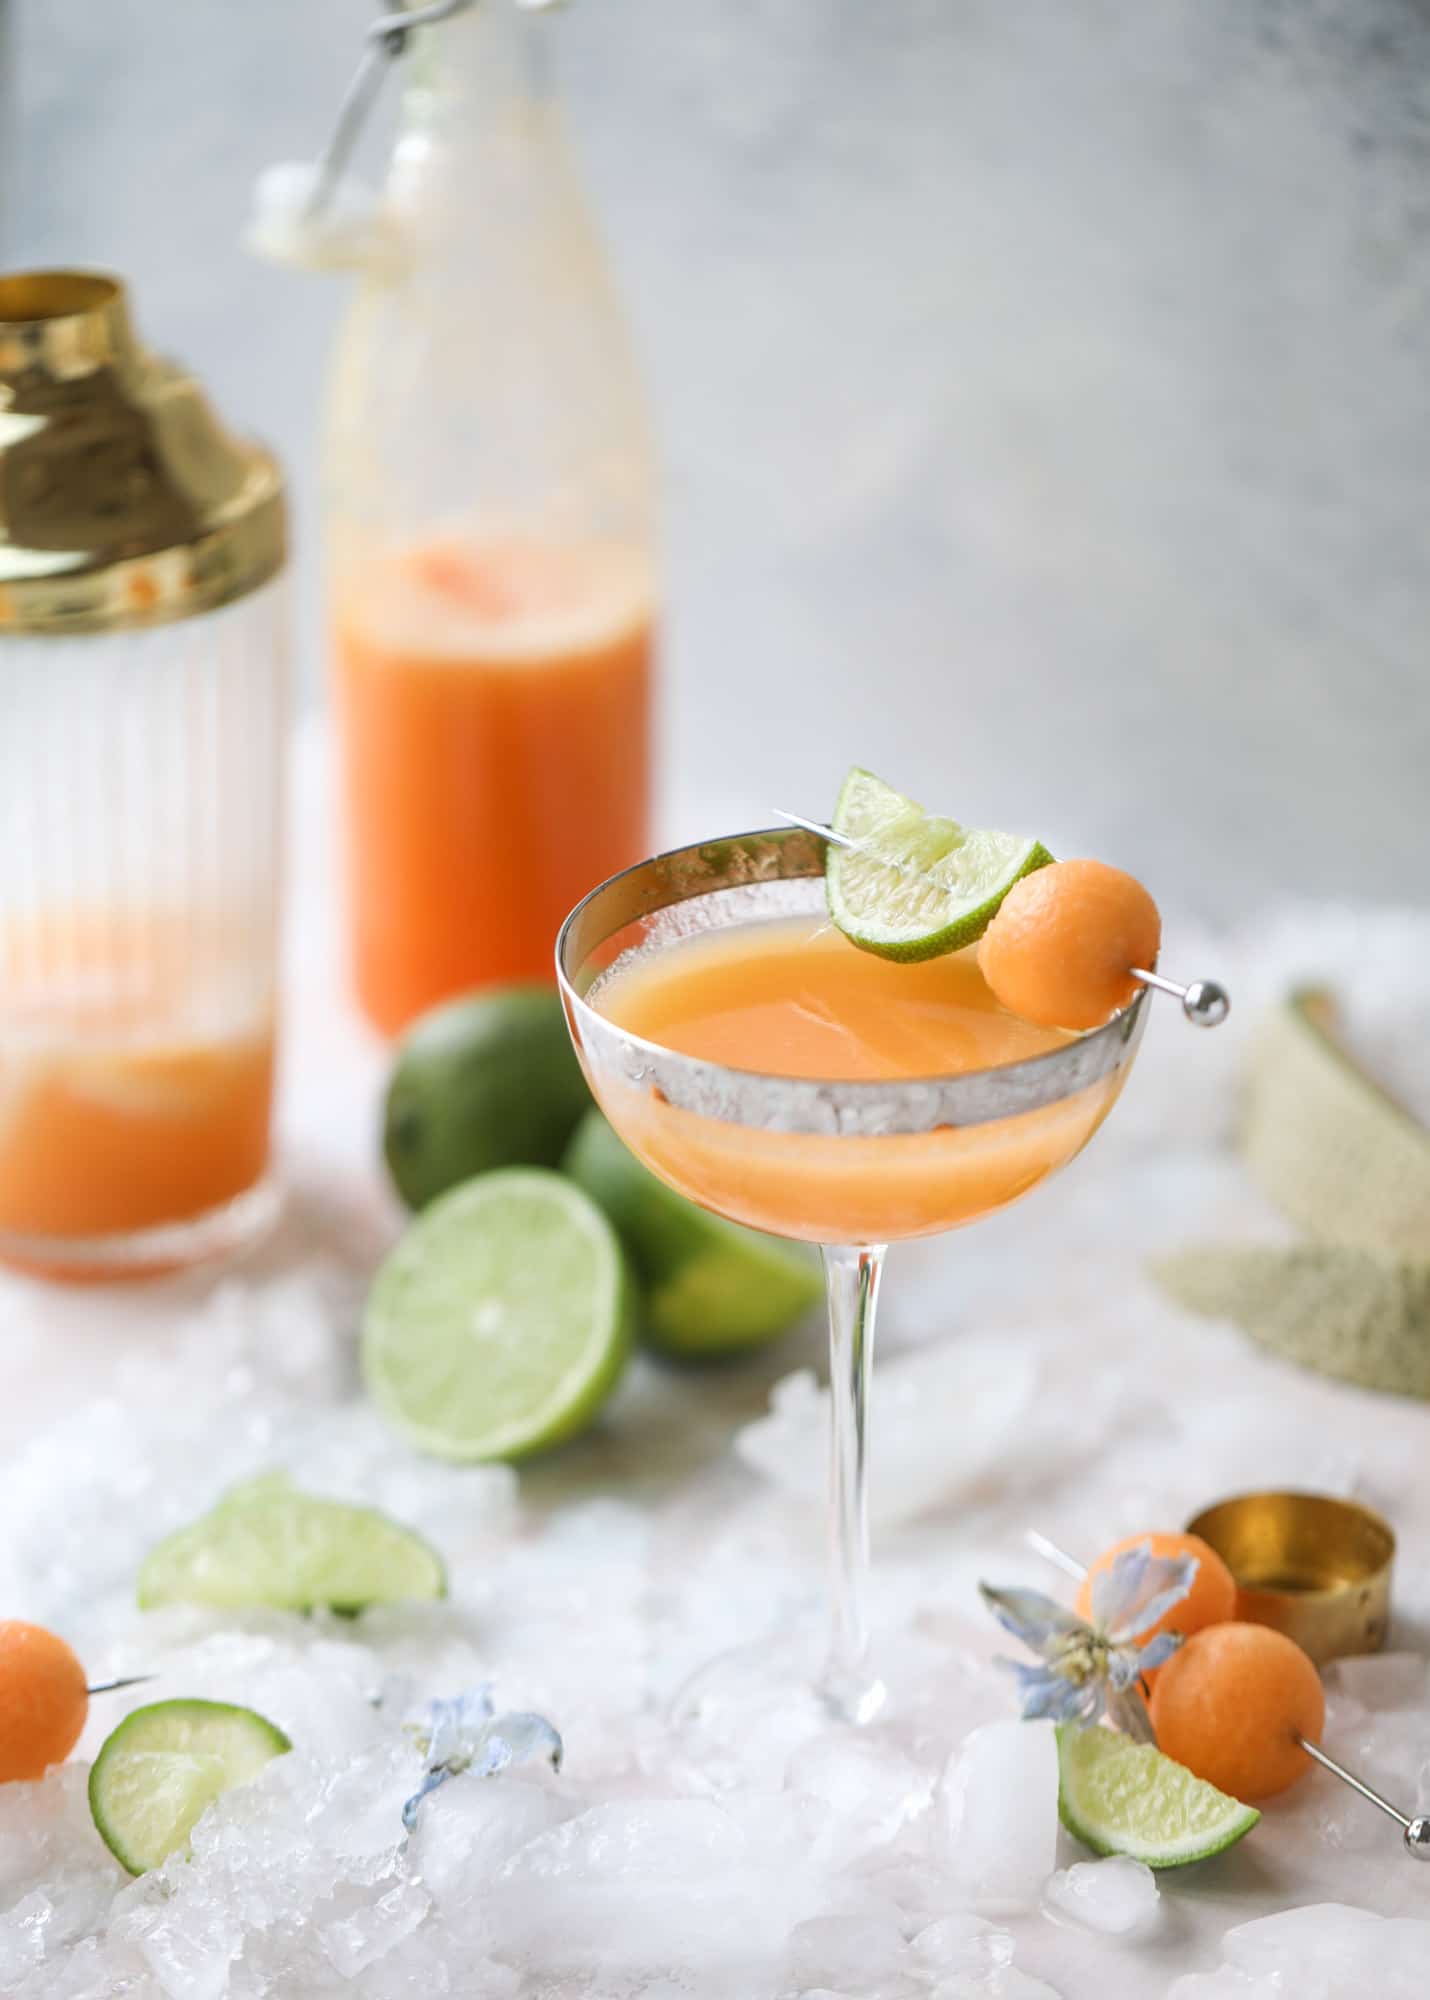 This cantaloupe daiquiri is the perfect way to celebrate summer! Freshly juiced melon, lime juice, rum and maraschino cherries - it's refreshing and cool and a fantastic cocktail to have during happy hour! Isn't the color amazing too?! I howsweeteats.com #cantaloupe #cocktail #daiquiri #lime #rum #summer